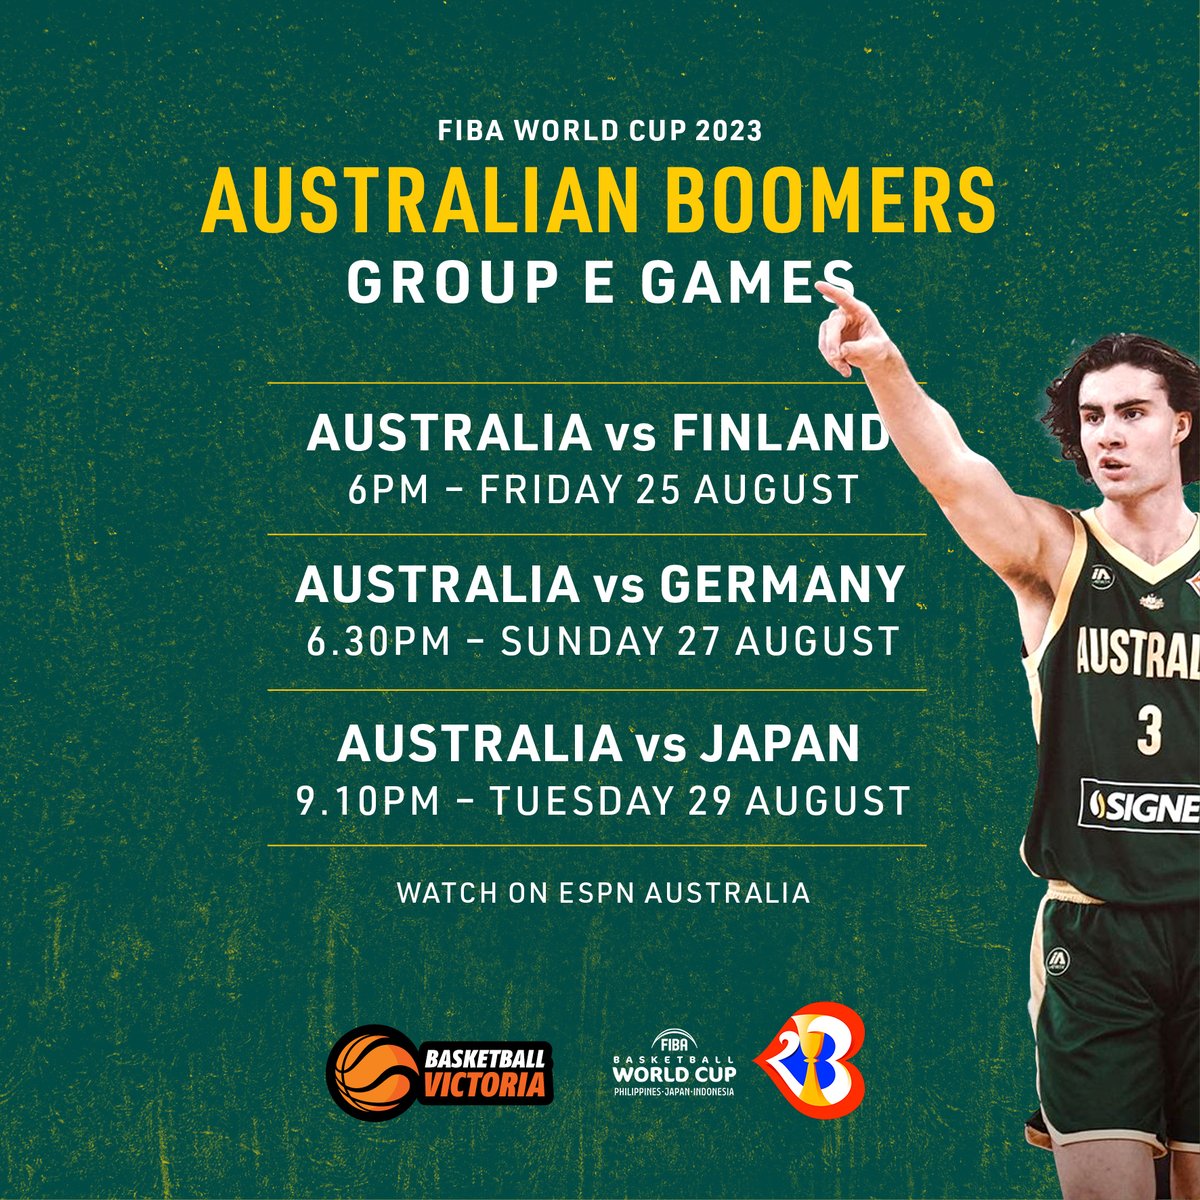 The final Boomers squad has been announced! Good luck to our Victorian Boomers playing in the men's @FIBAWC  Josh Giddey Jack White Dante Exum Dyson Daniels Tune into @espn  to watch Boomers! For more information about the Men's World Cup! brnw.ch/21wBTHk